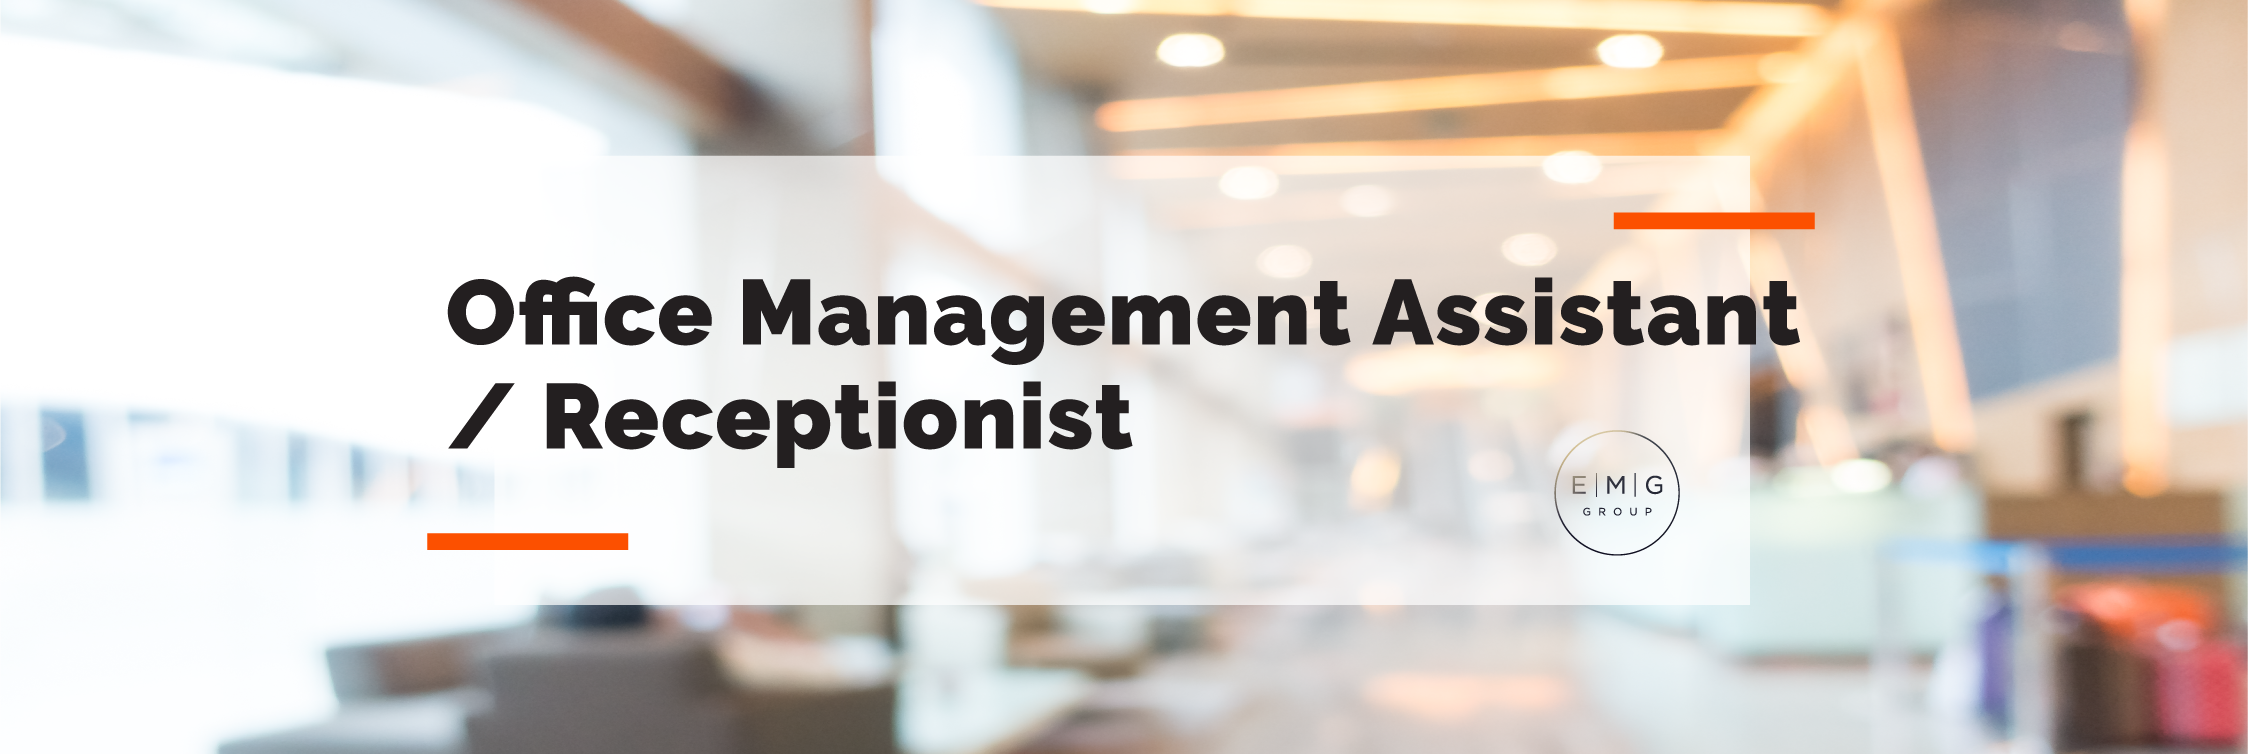 We are looking for a Receptionist/Office Management Assistant